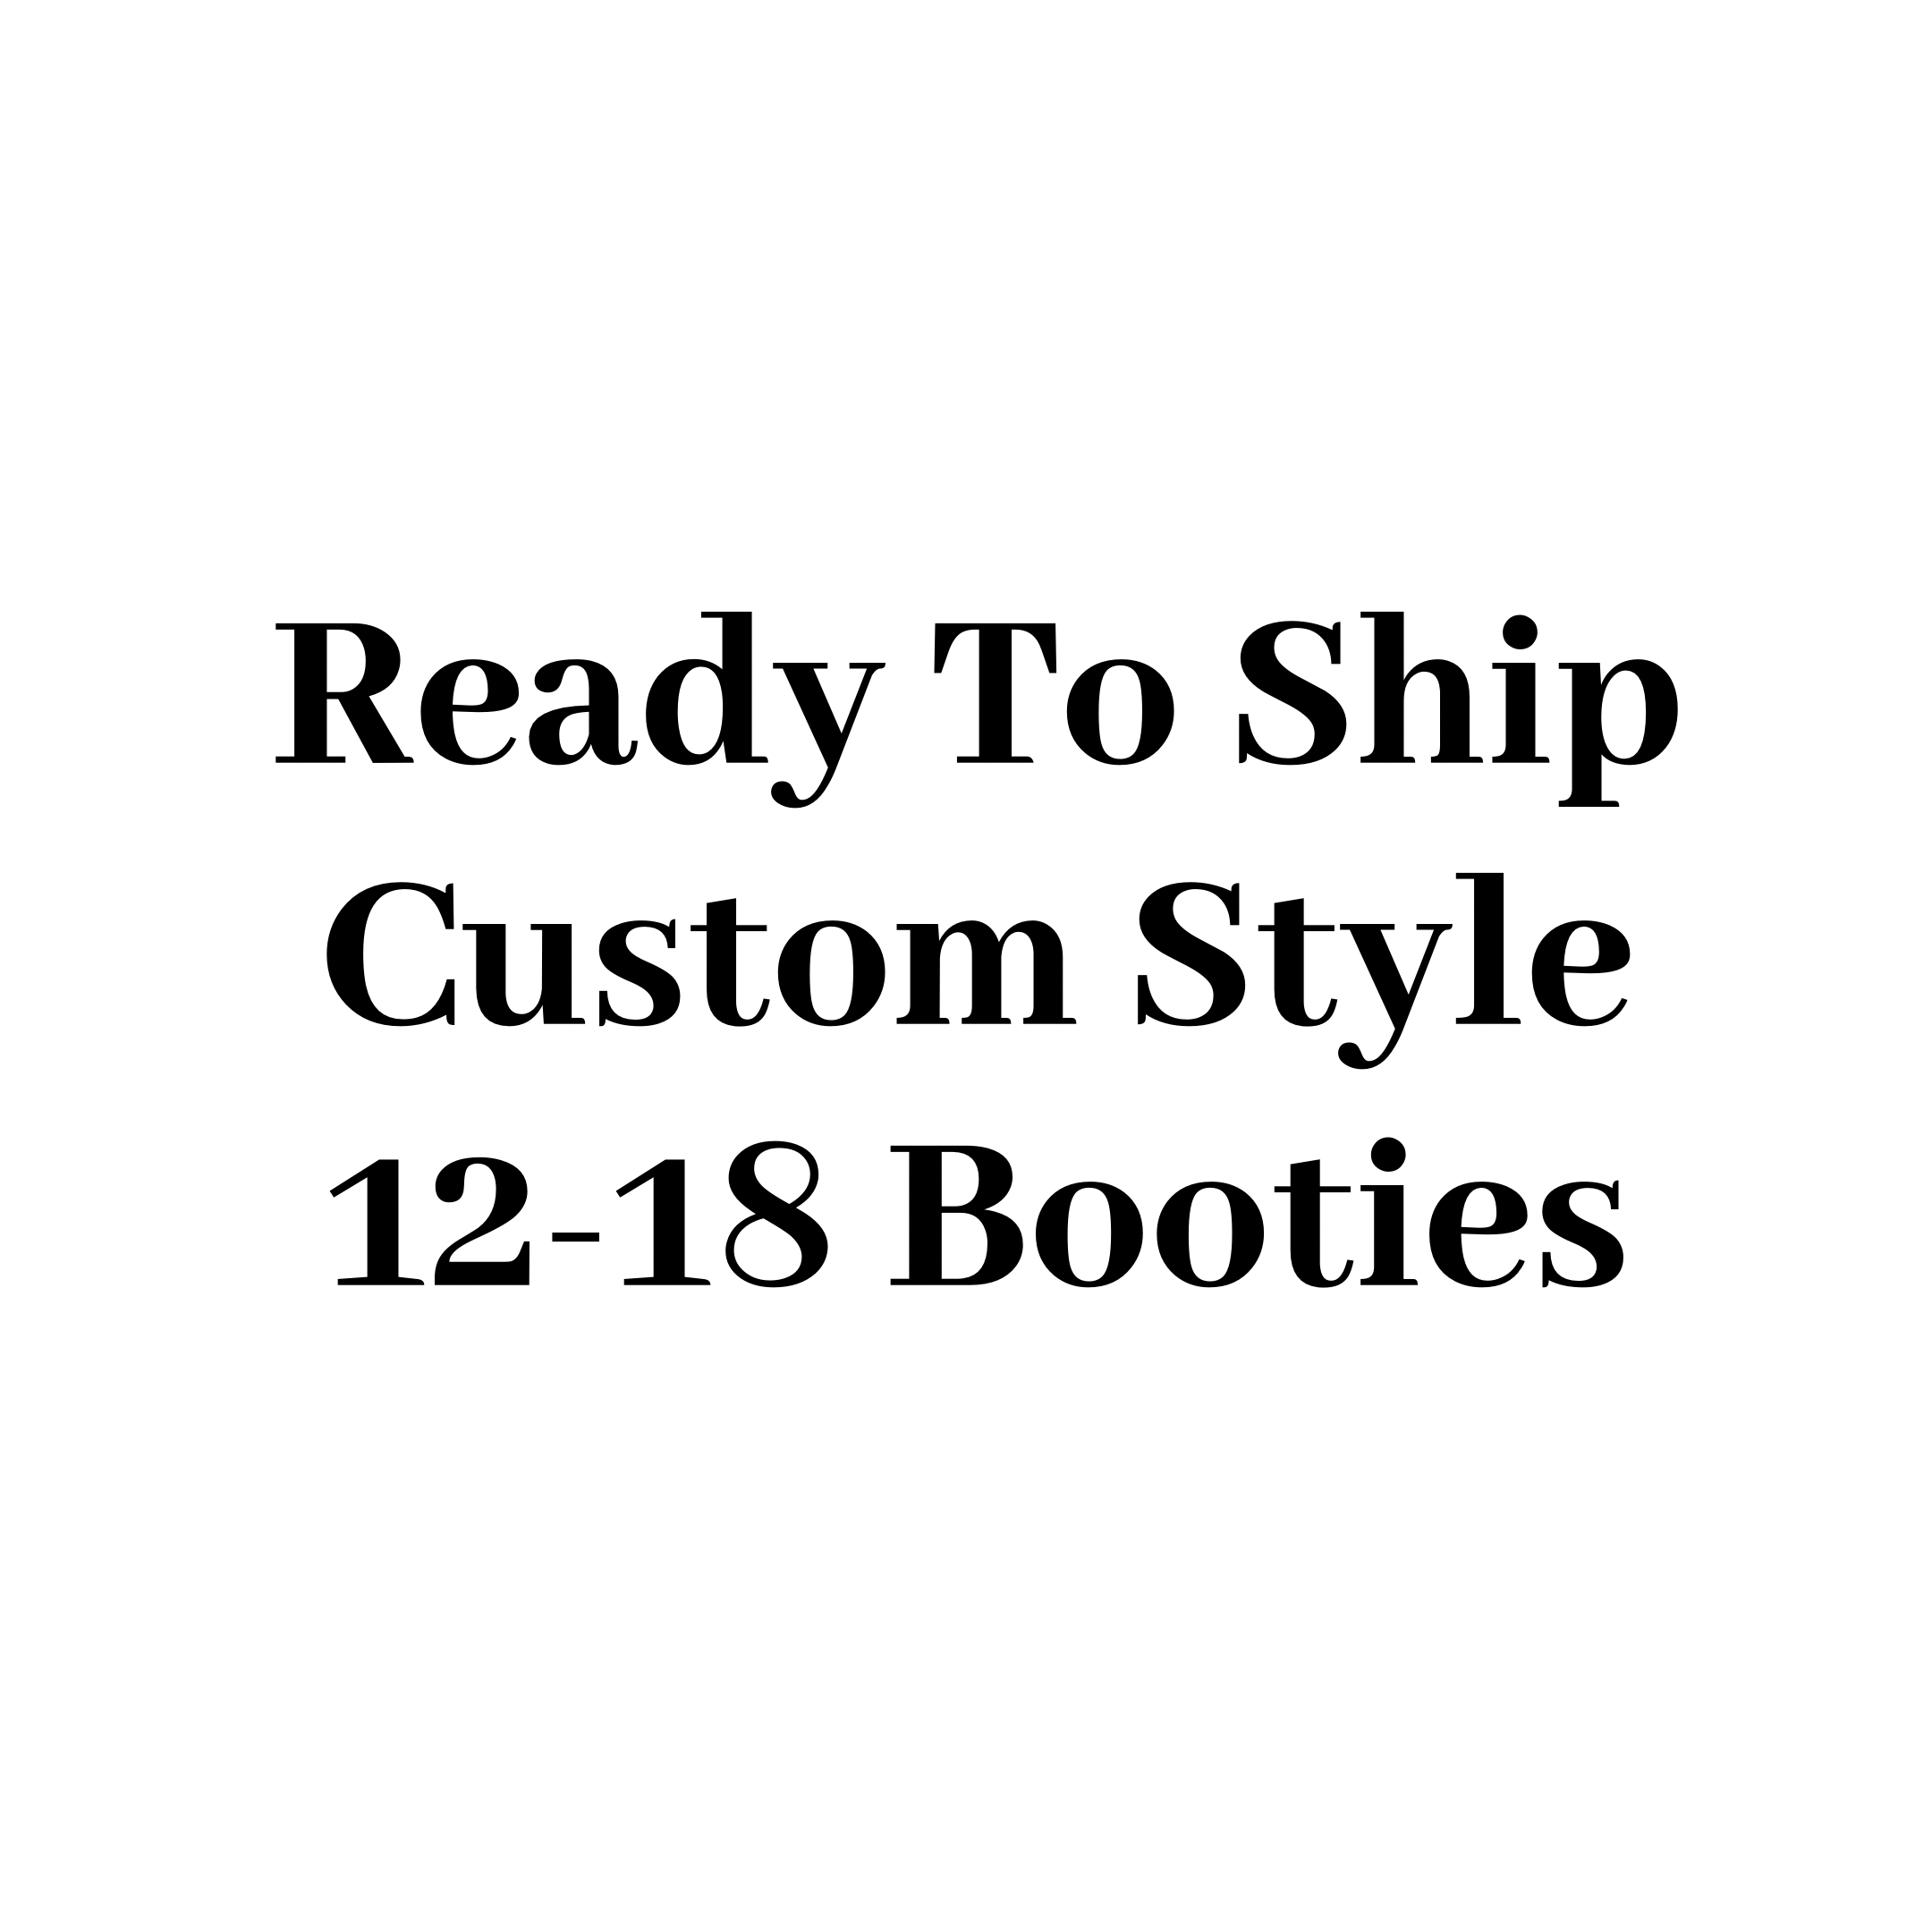 RTS Custom Style Booties 12-18 Months - 5.5" Sole